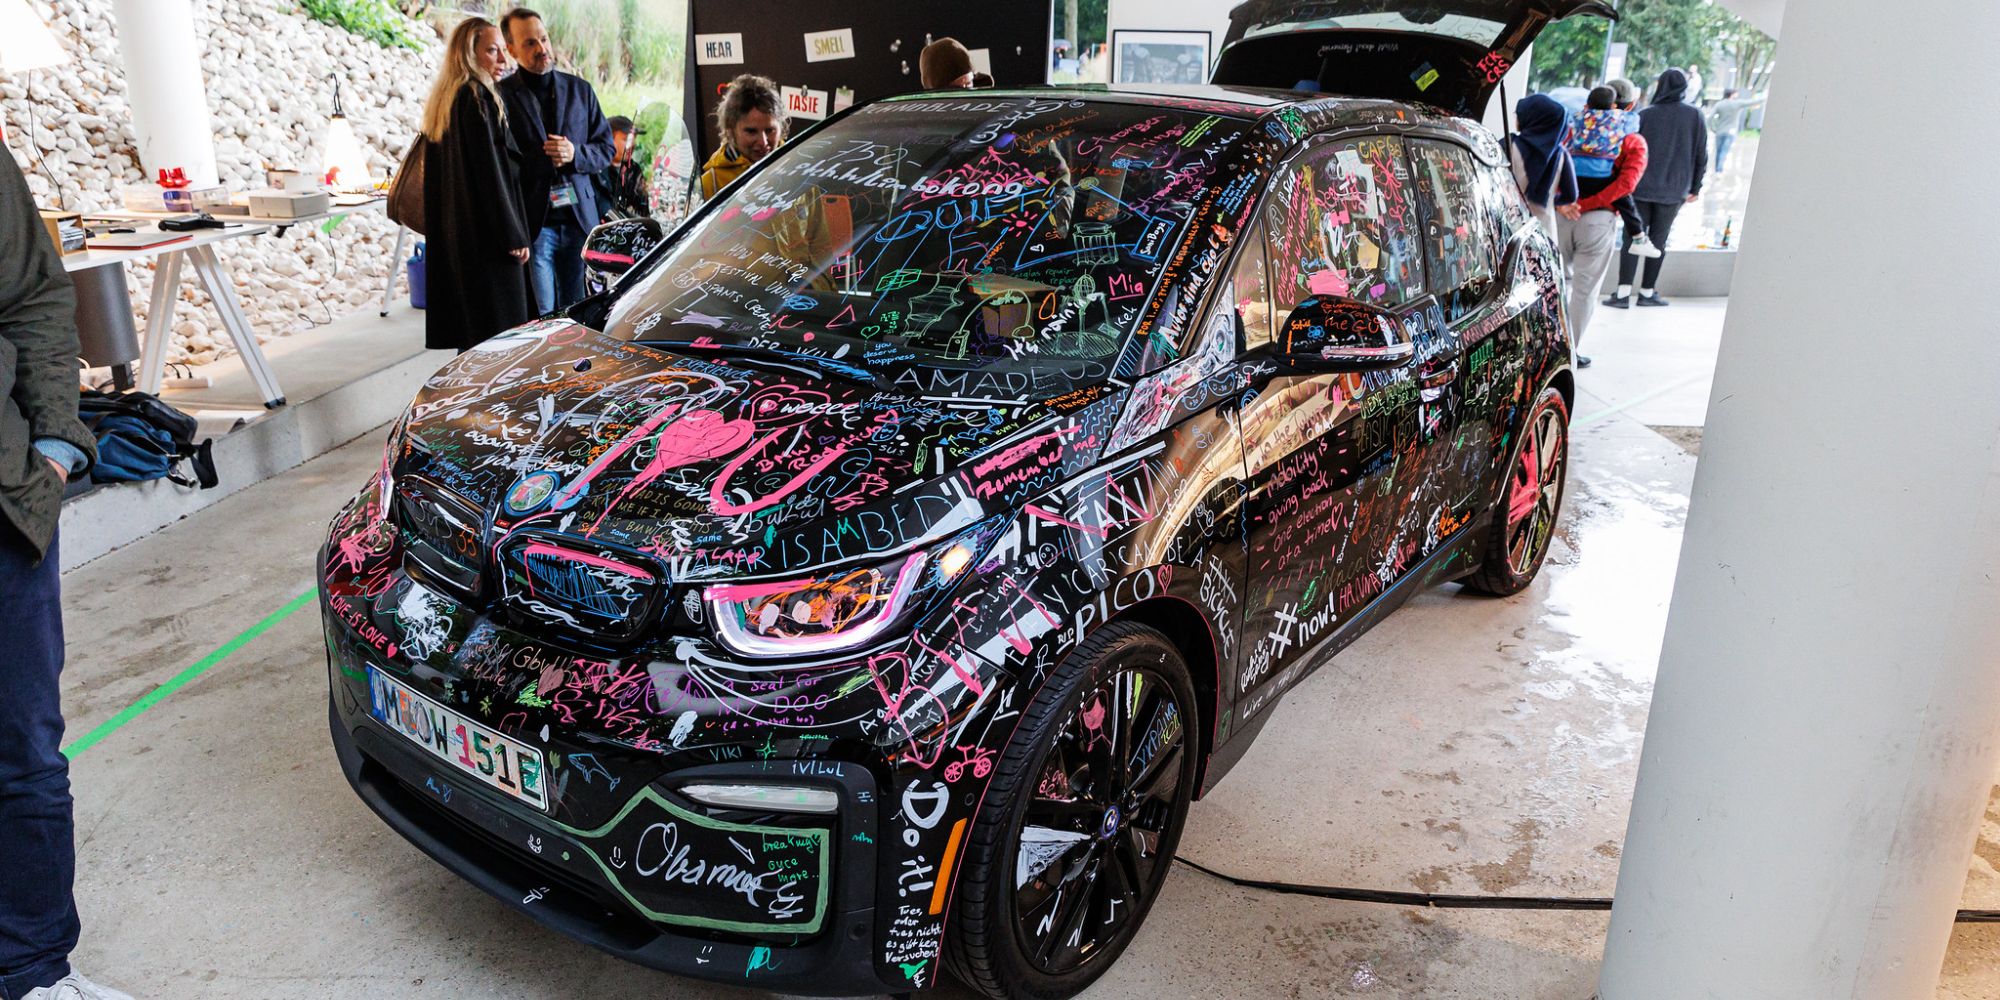 Wishes and messages regarding future mobility written on the reimagined car